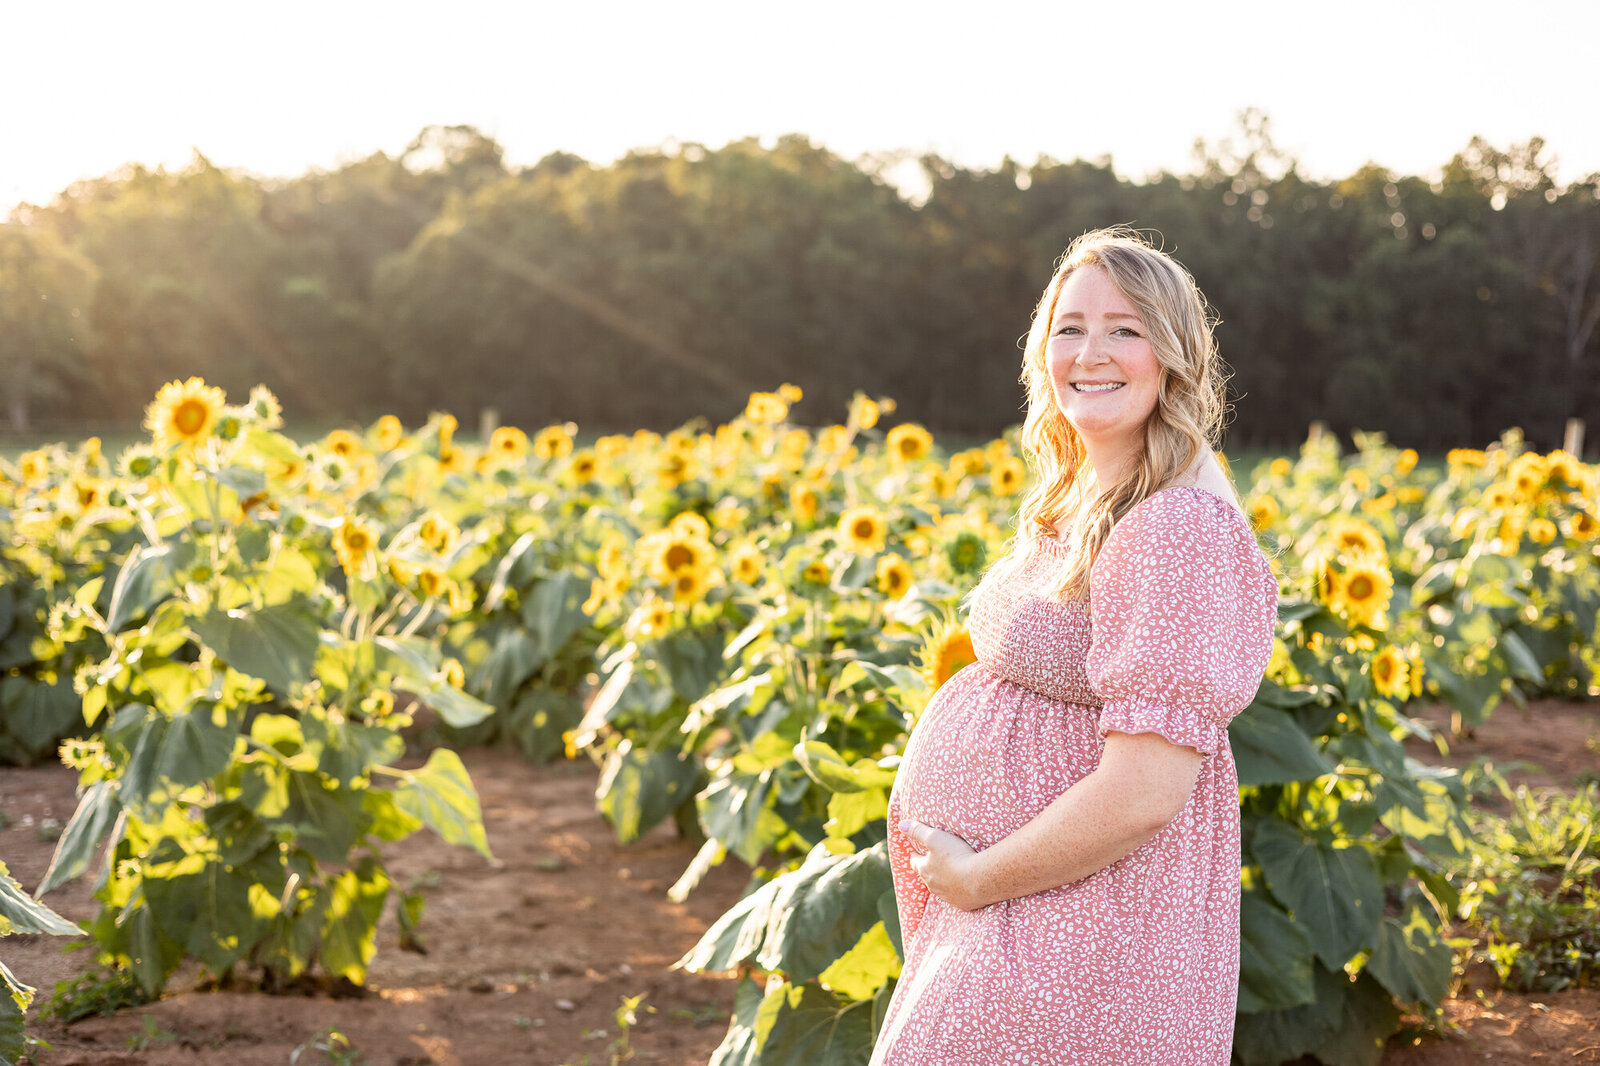 Outdoor-maternity-photography-sunflower-field-Georgetown-KY-photographer-4